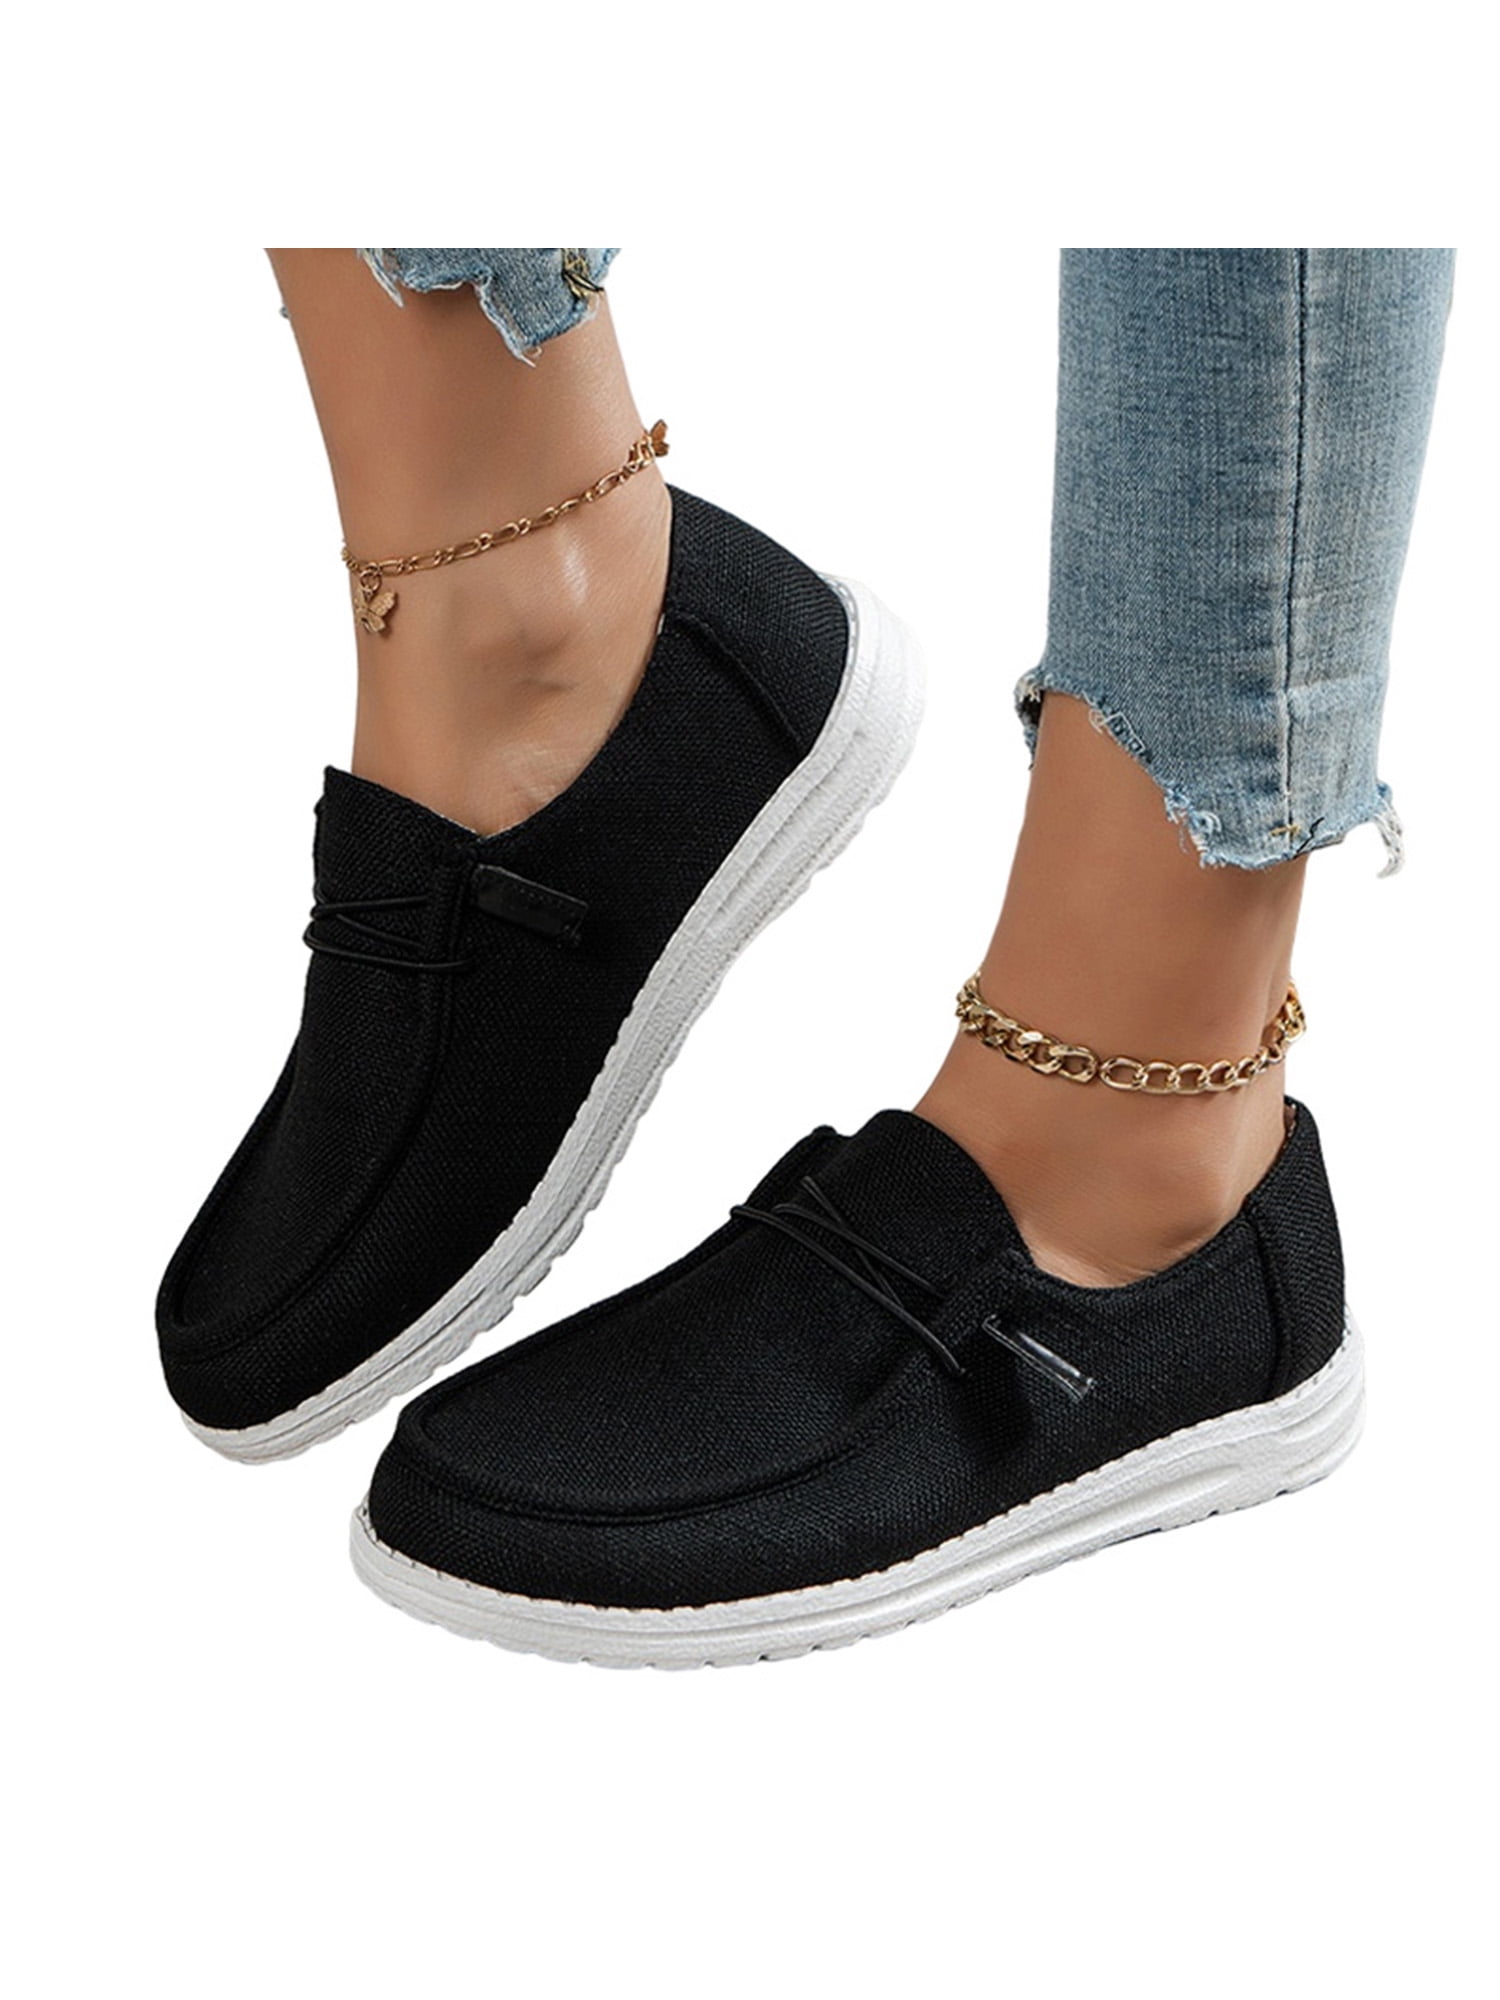 Casual Shoes for Comfort Slip On Sneakers Non-Slip Lightweight Loafers Black 9 Walmart.com